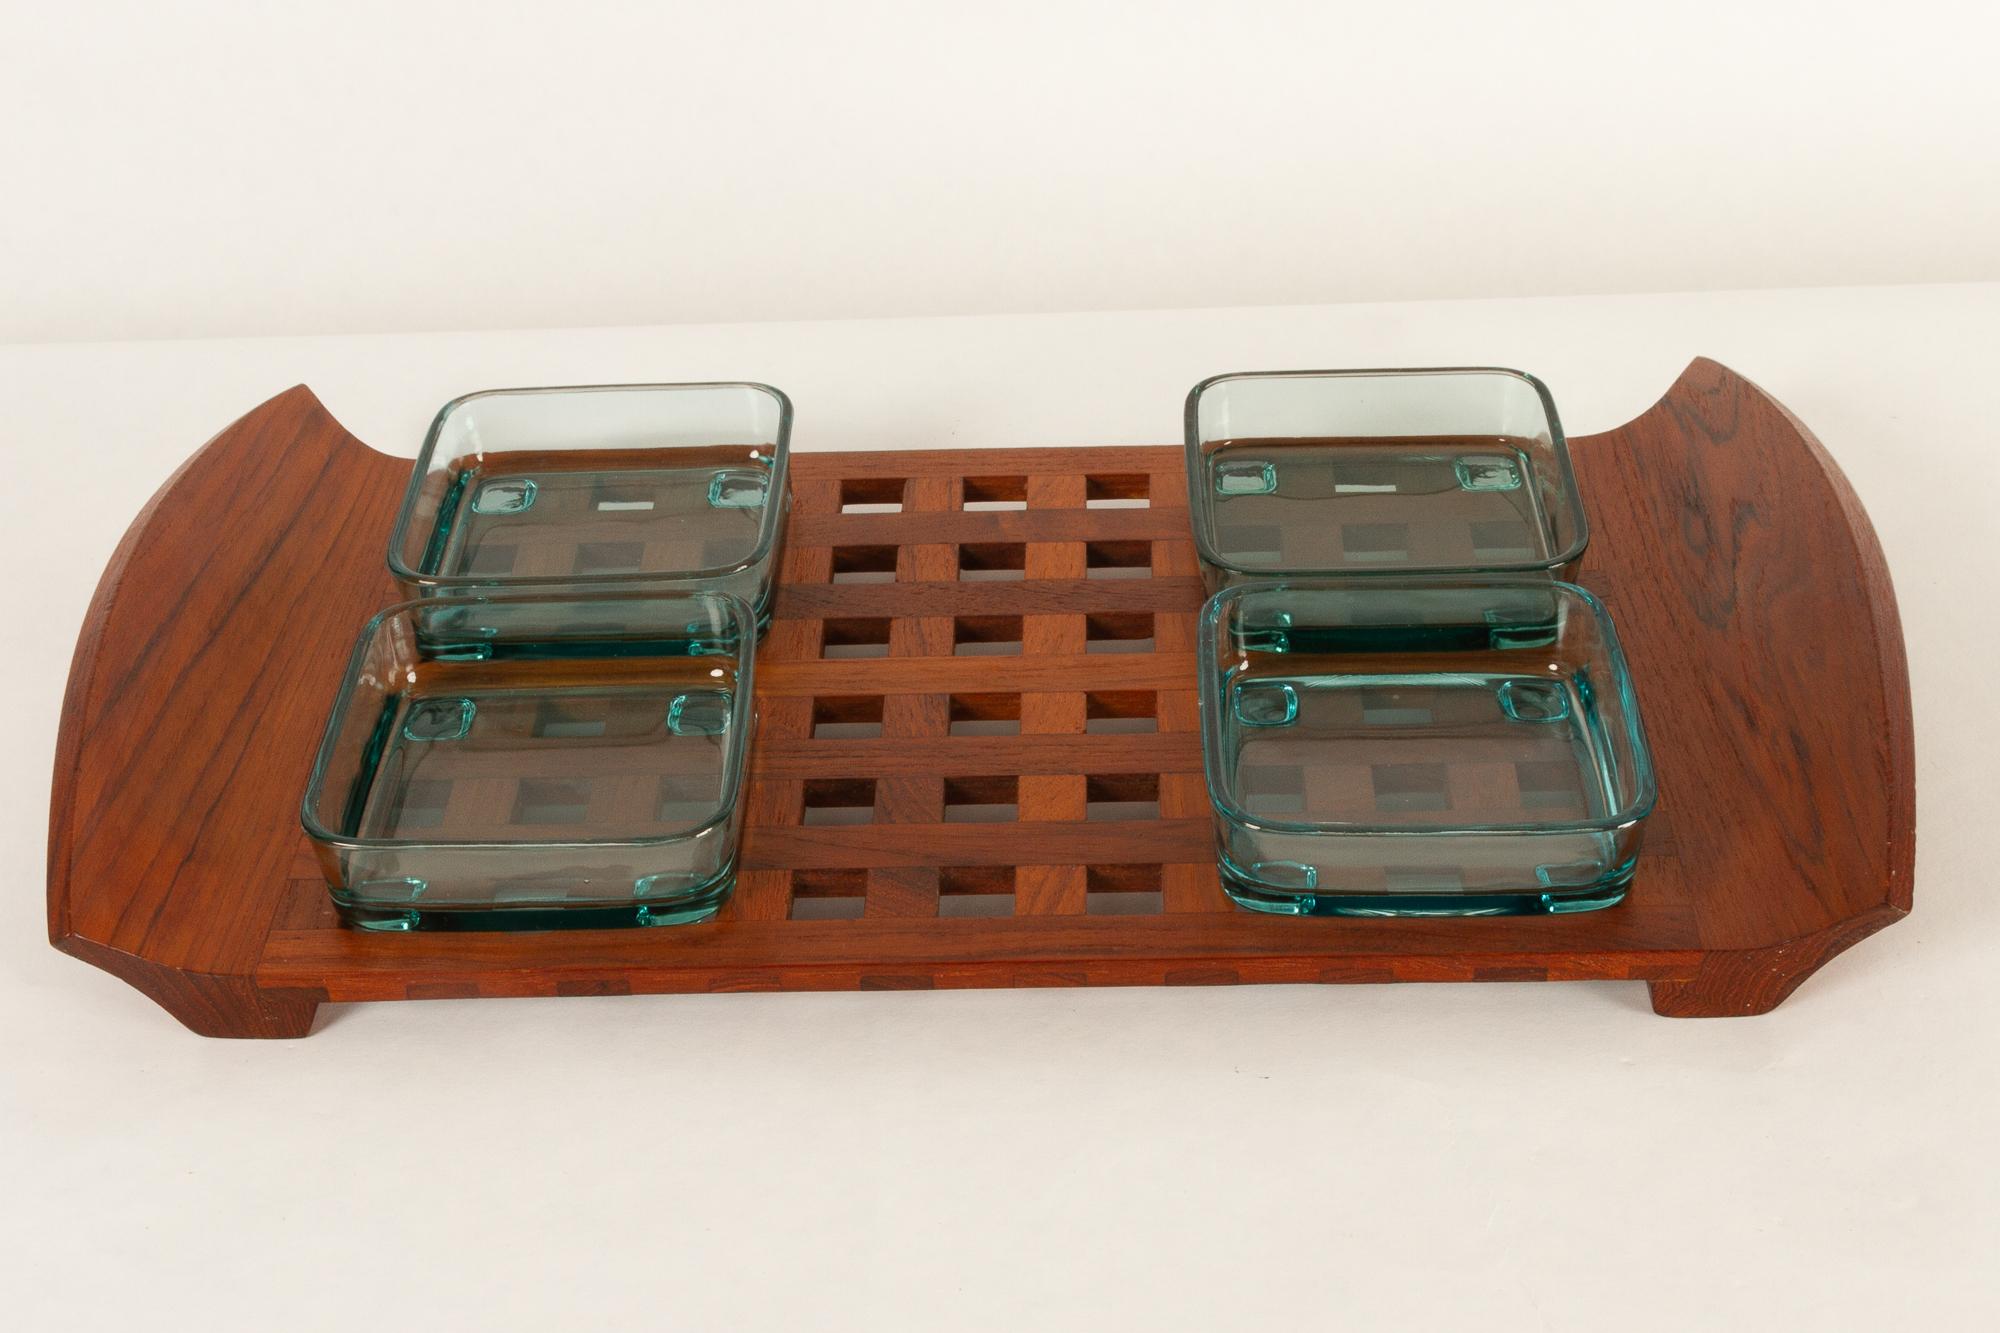 Vintage Danish Teak Tray with Glass Bowls by Jens Harald Quistgaard, 1960s For Sale 1